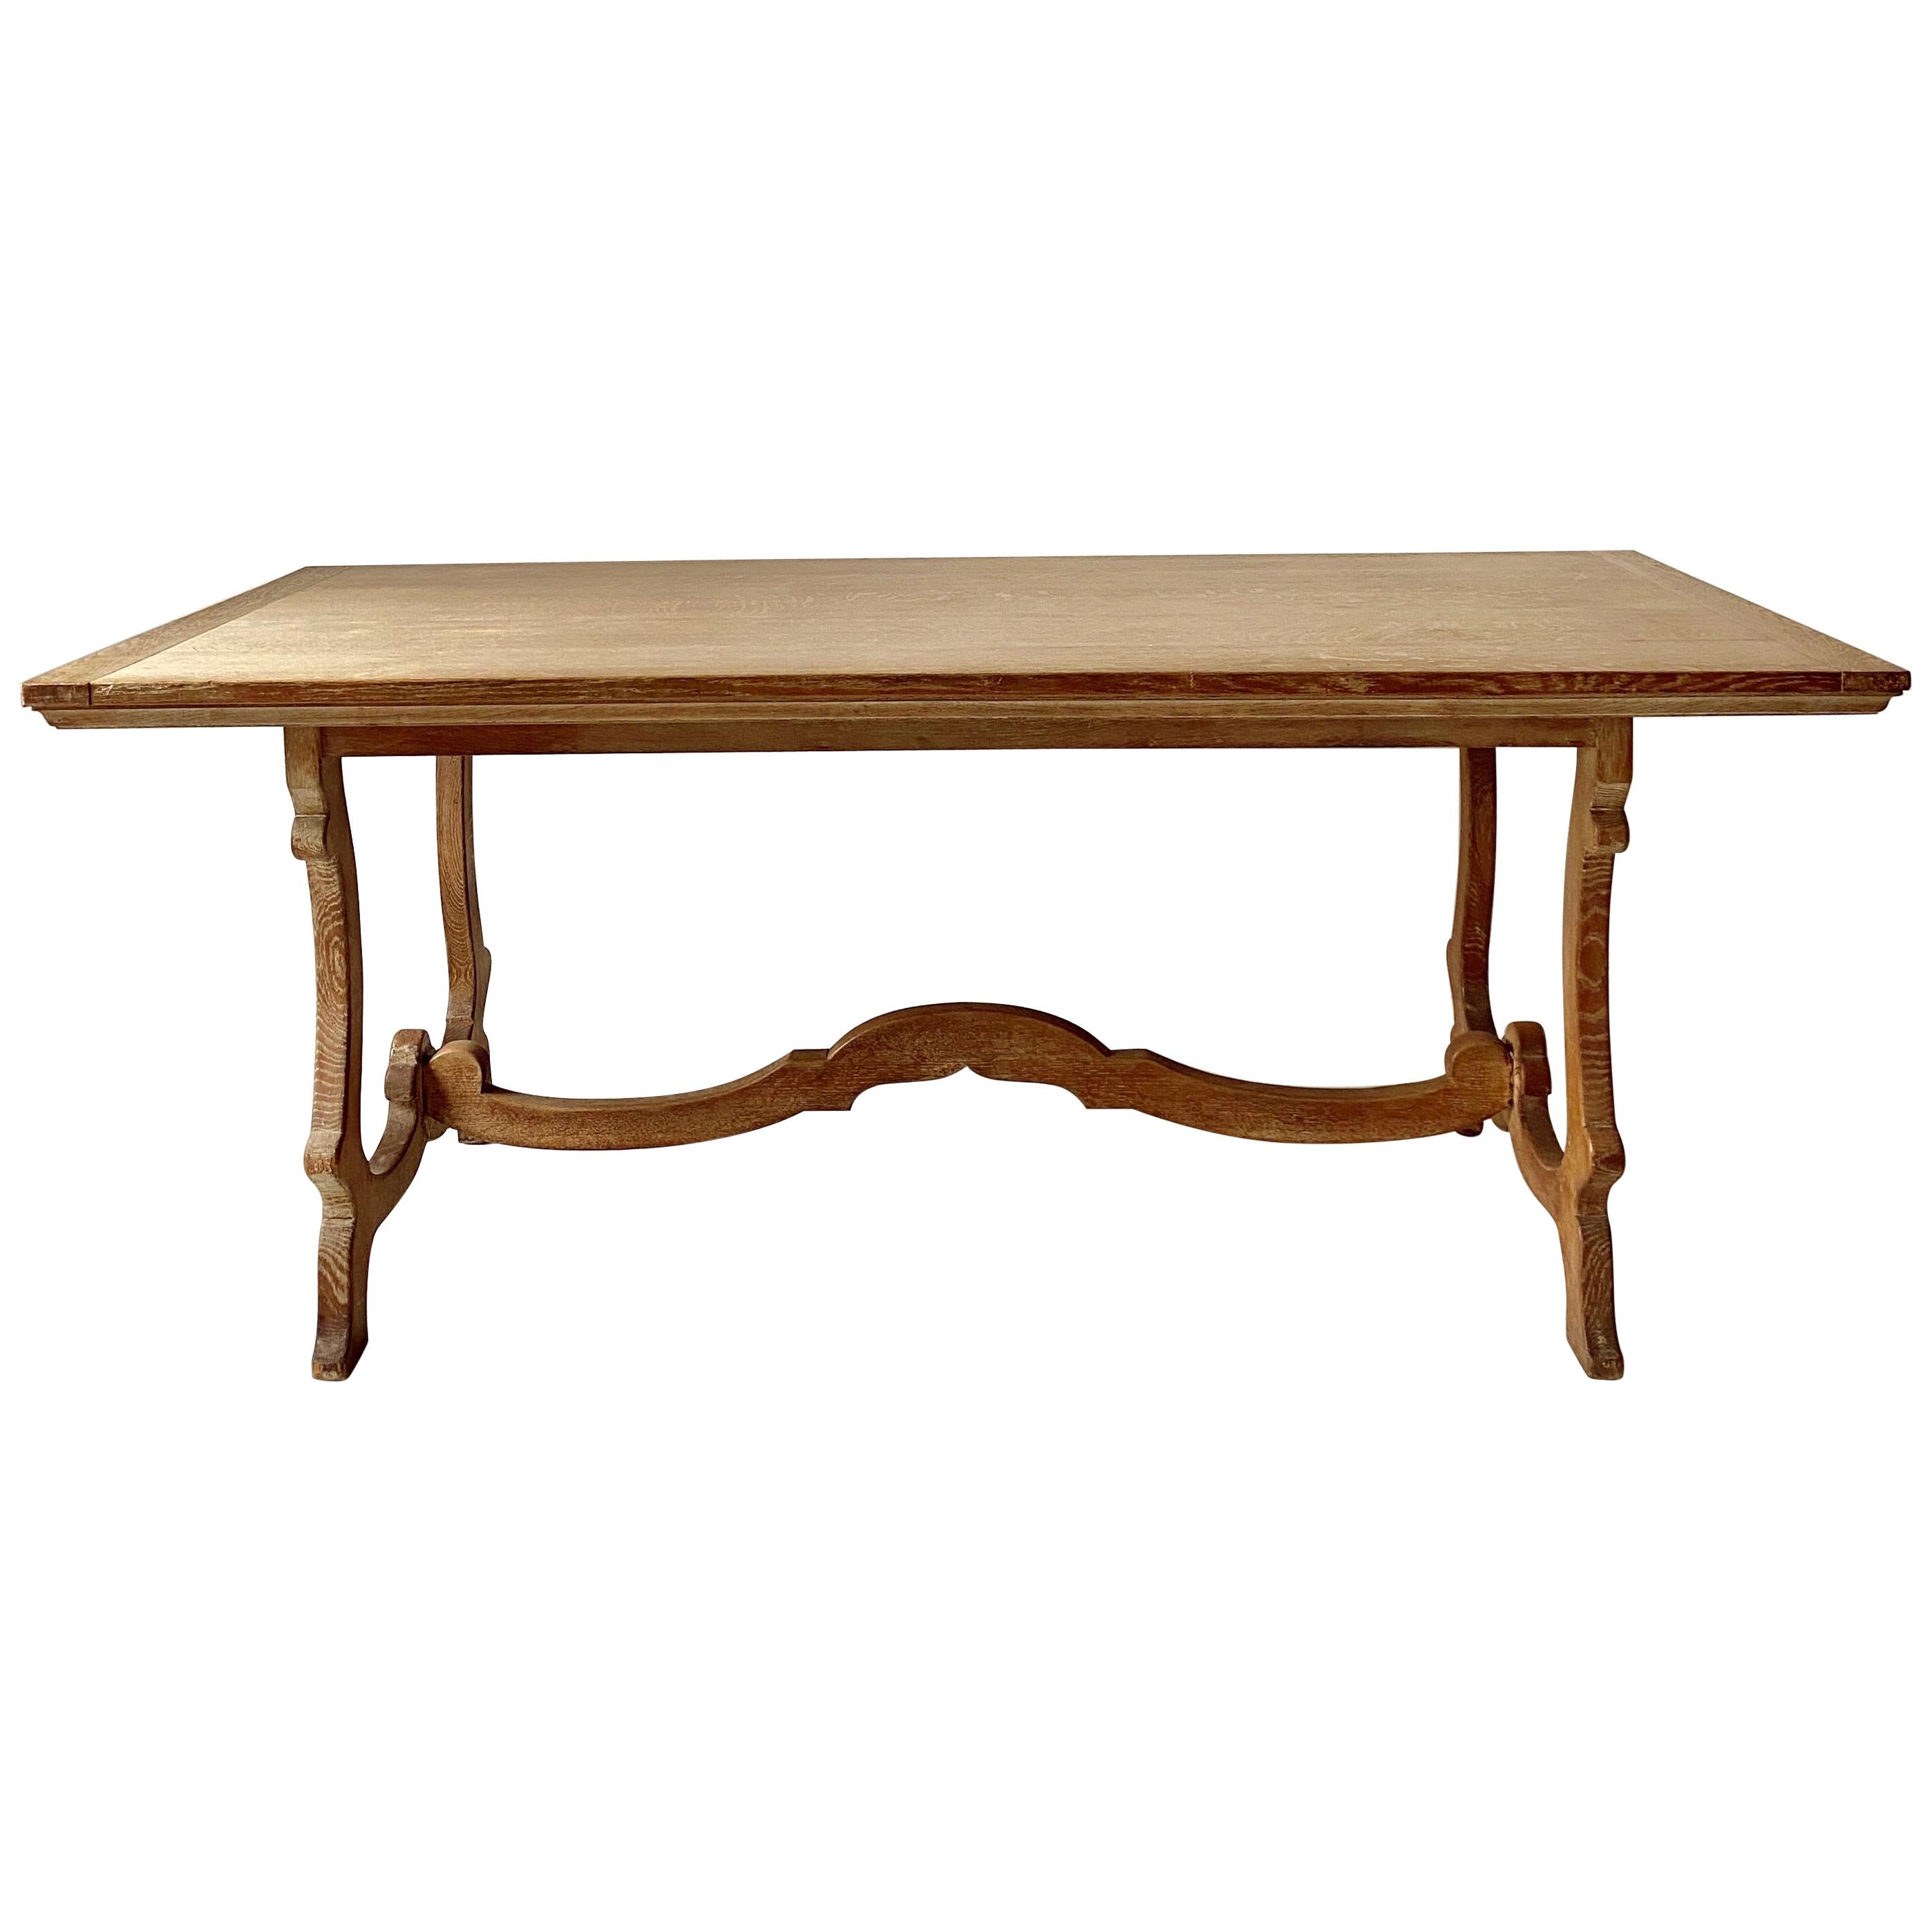 Scottish Dining Room Table in Limed Oak, circa 1900